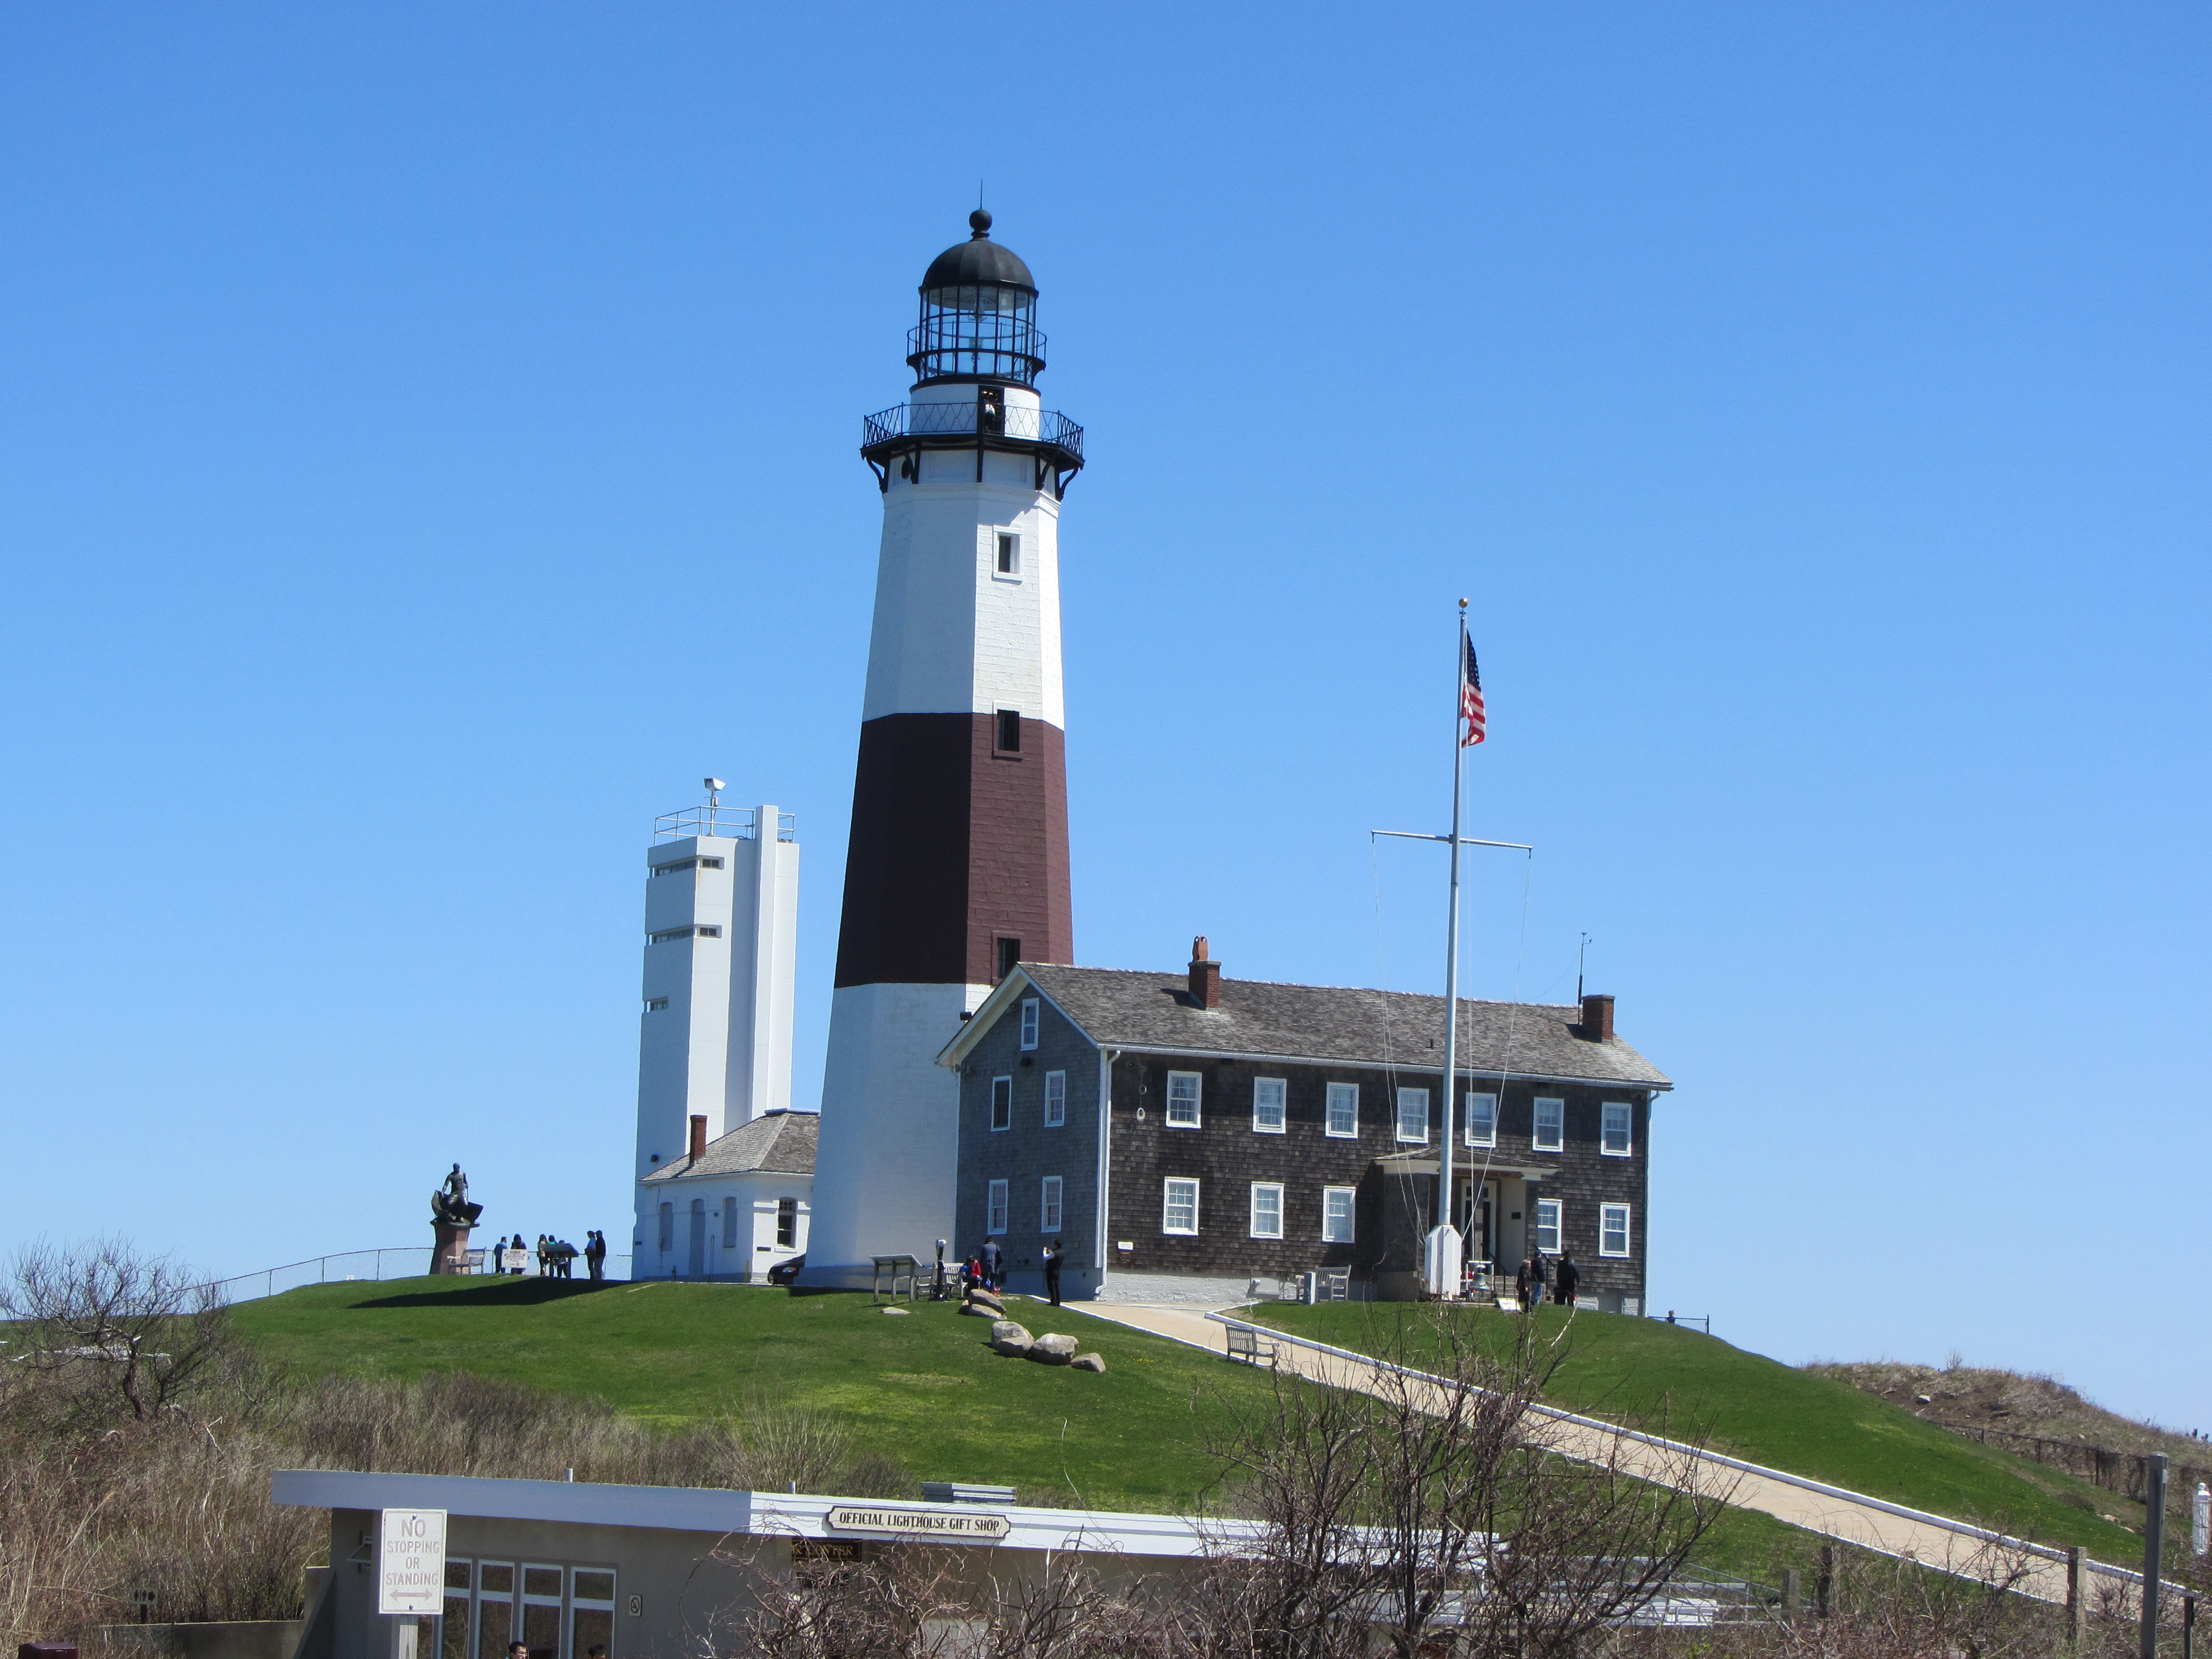 The Montauk Lighthouse on Turtle Hill, photo by S. Dermont